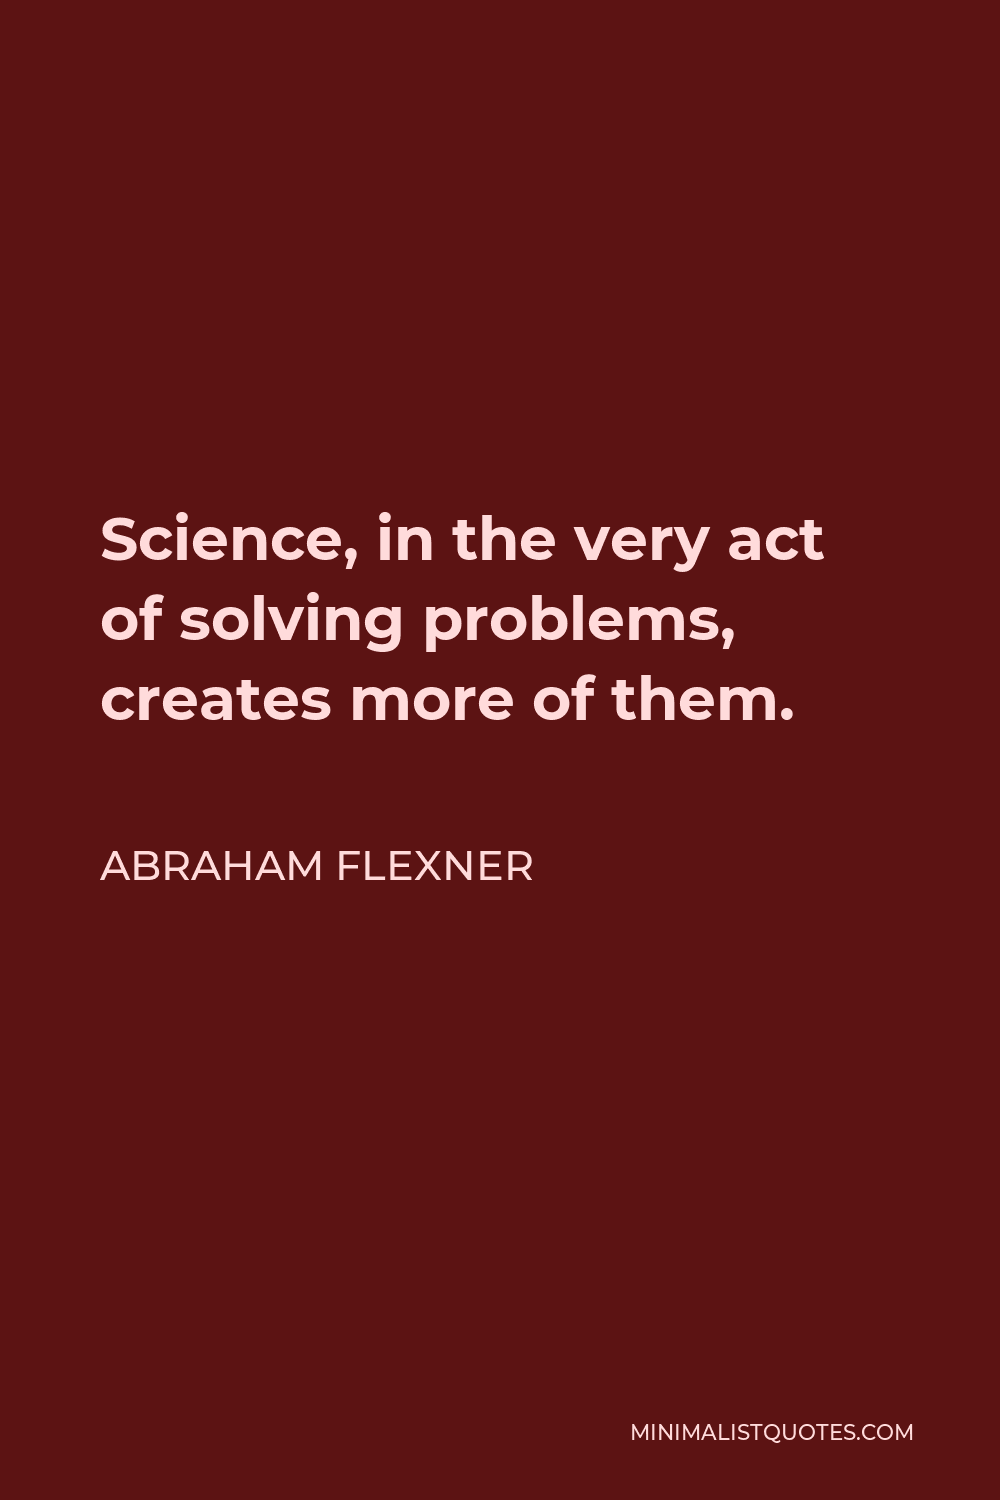 Abraham Flexner Quote - Science, in the very act of solving problems, creates more of them.